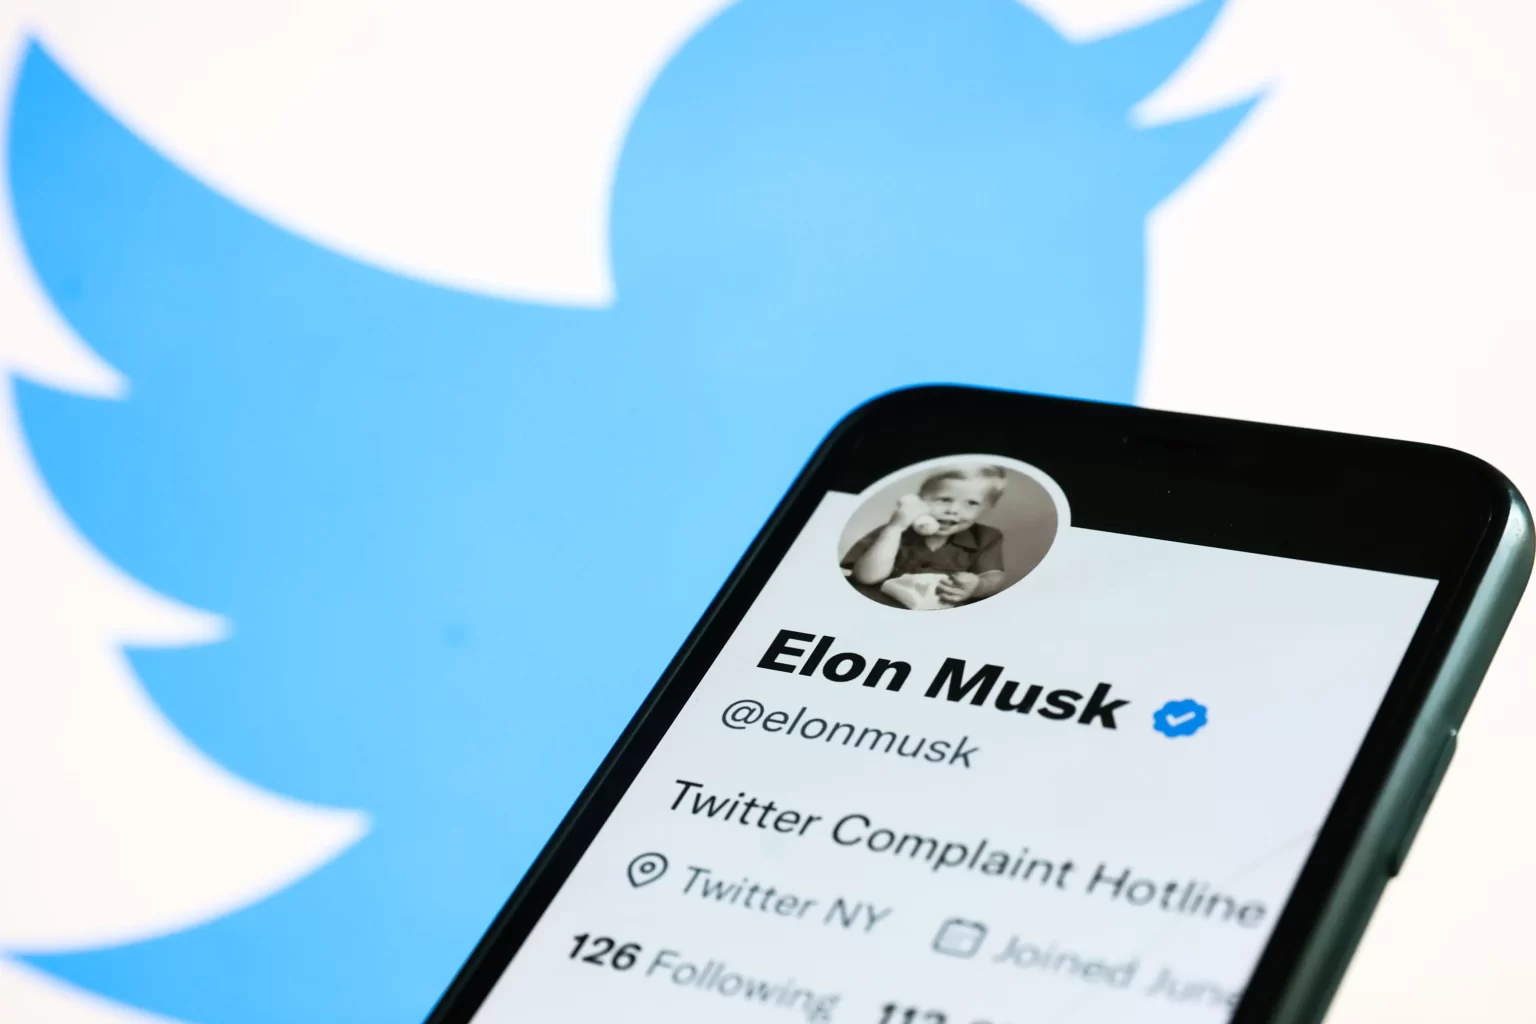 image cnbcfm com 107146151 1667560529620 gettyimages 1244400855 porzycki elonmusk221101 npwjk 1 1536x1024 - Twitter is reportedly developing "Twitter Coin."